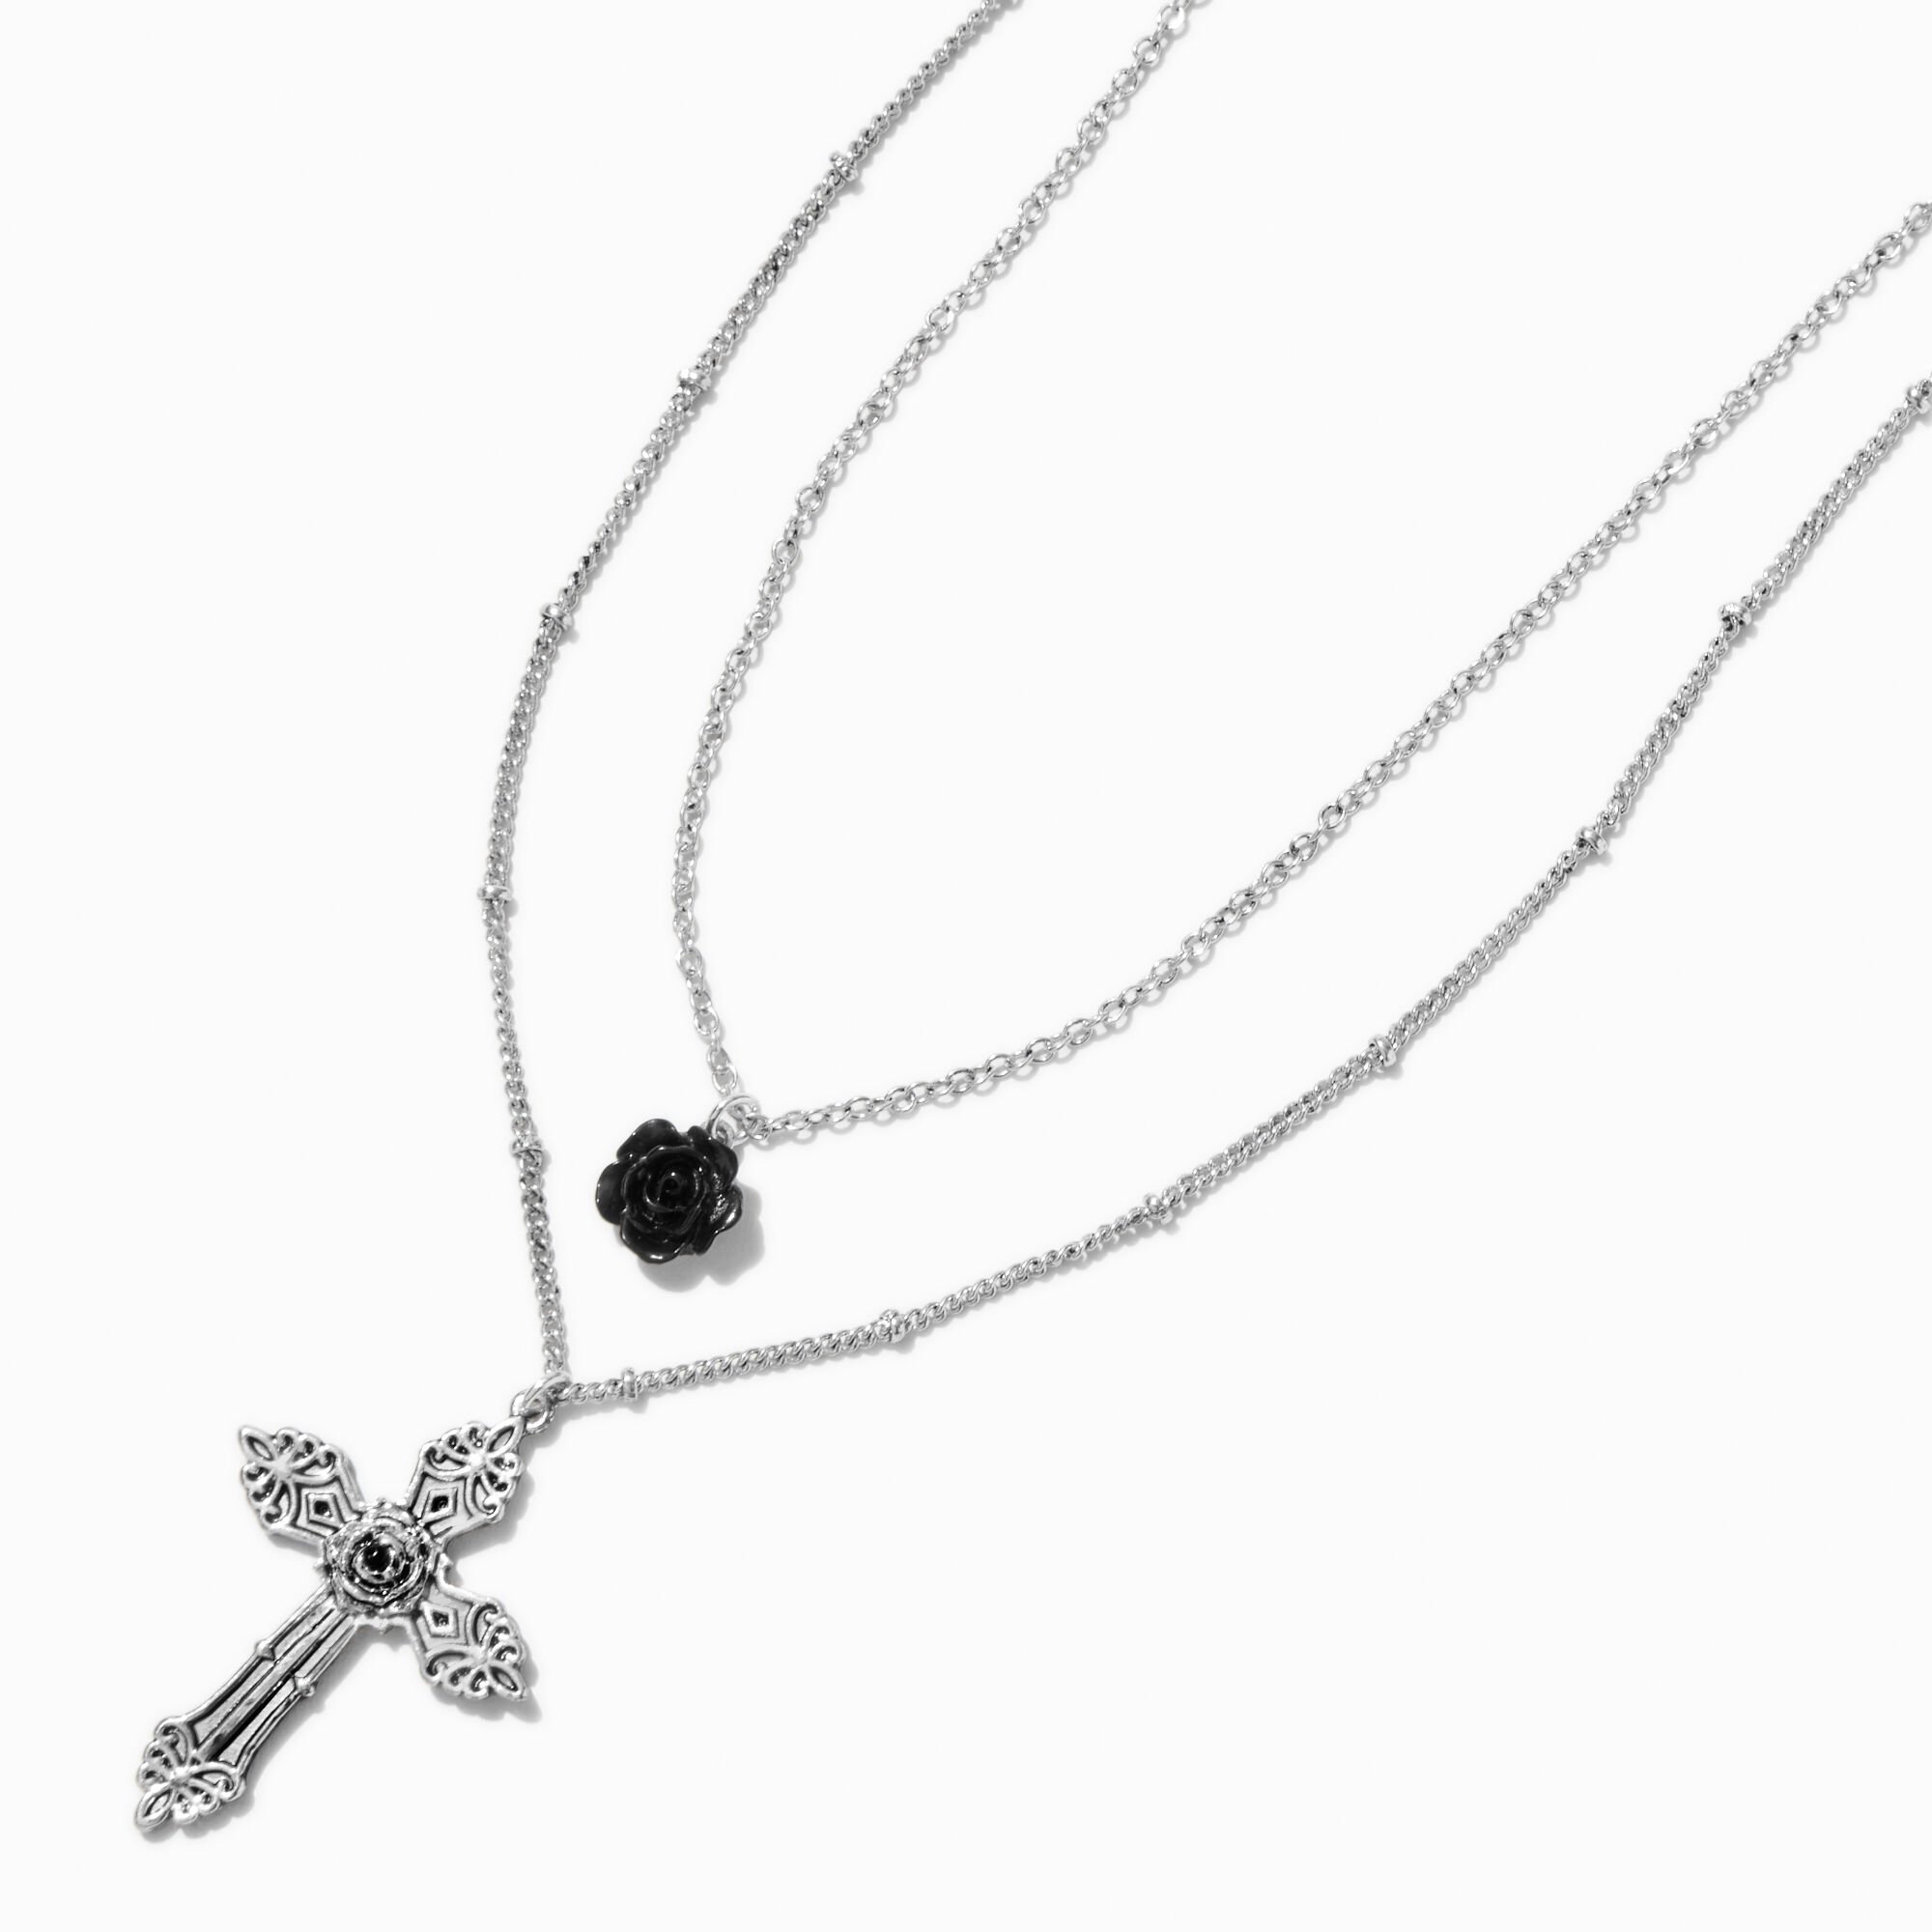 View Claires SilverTone Carved Rose Cross MultiStrand Necklace Black information